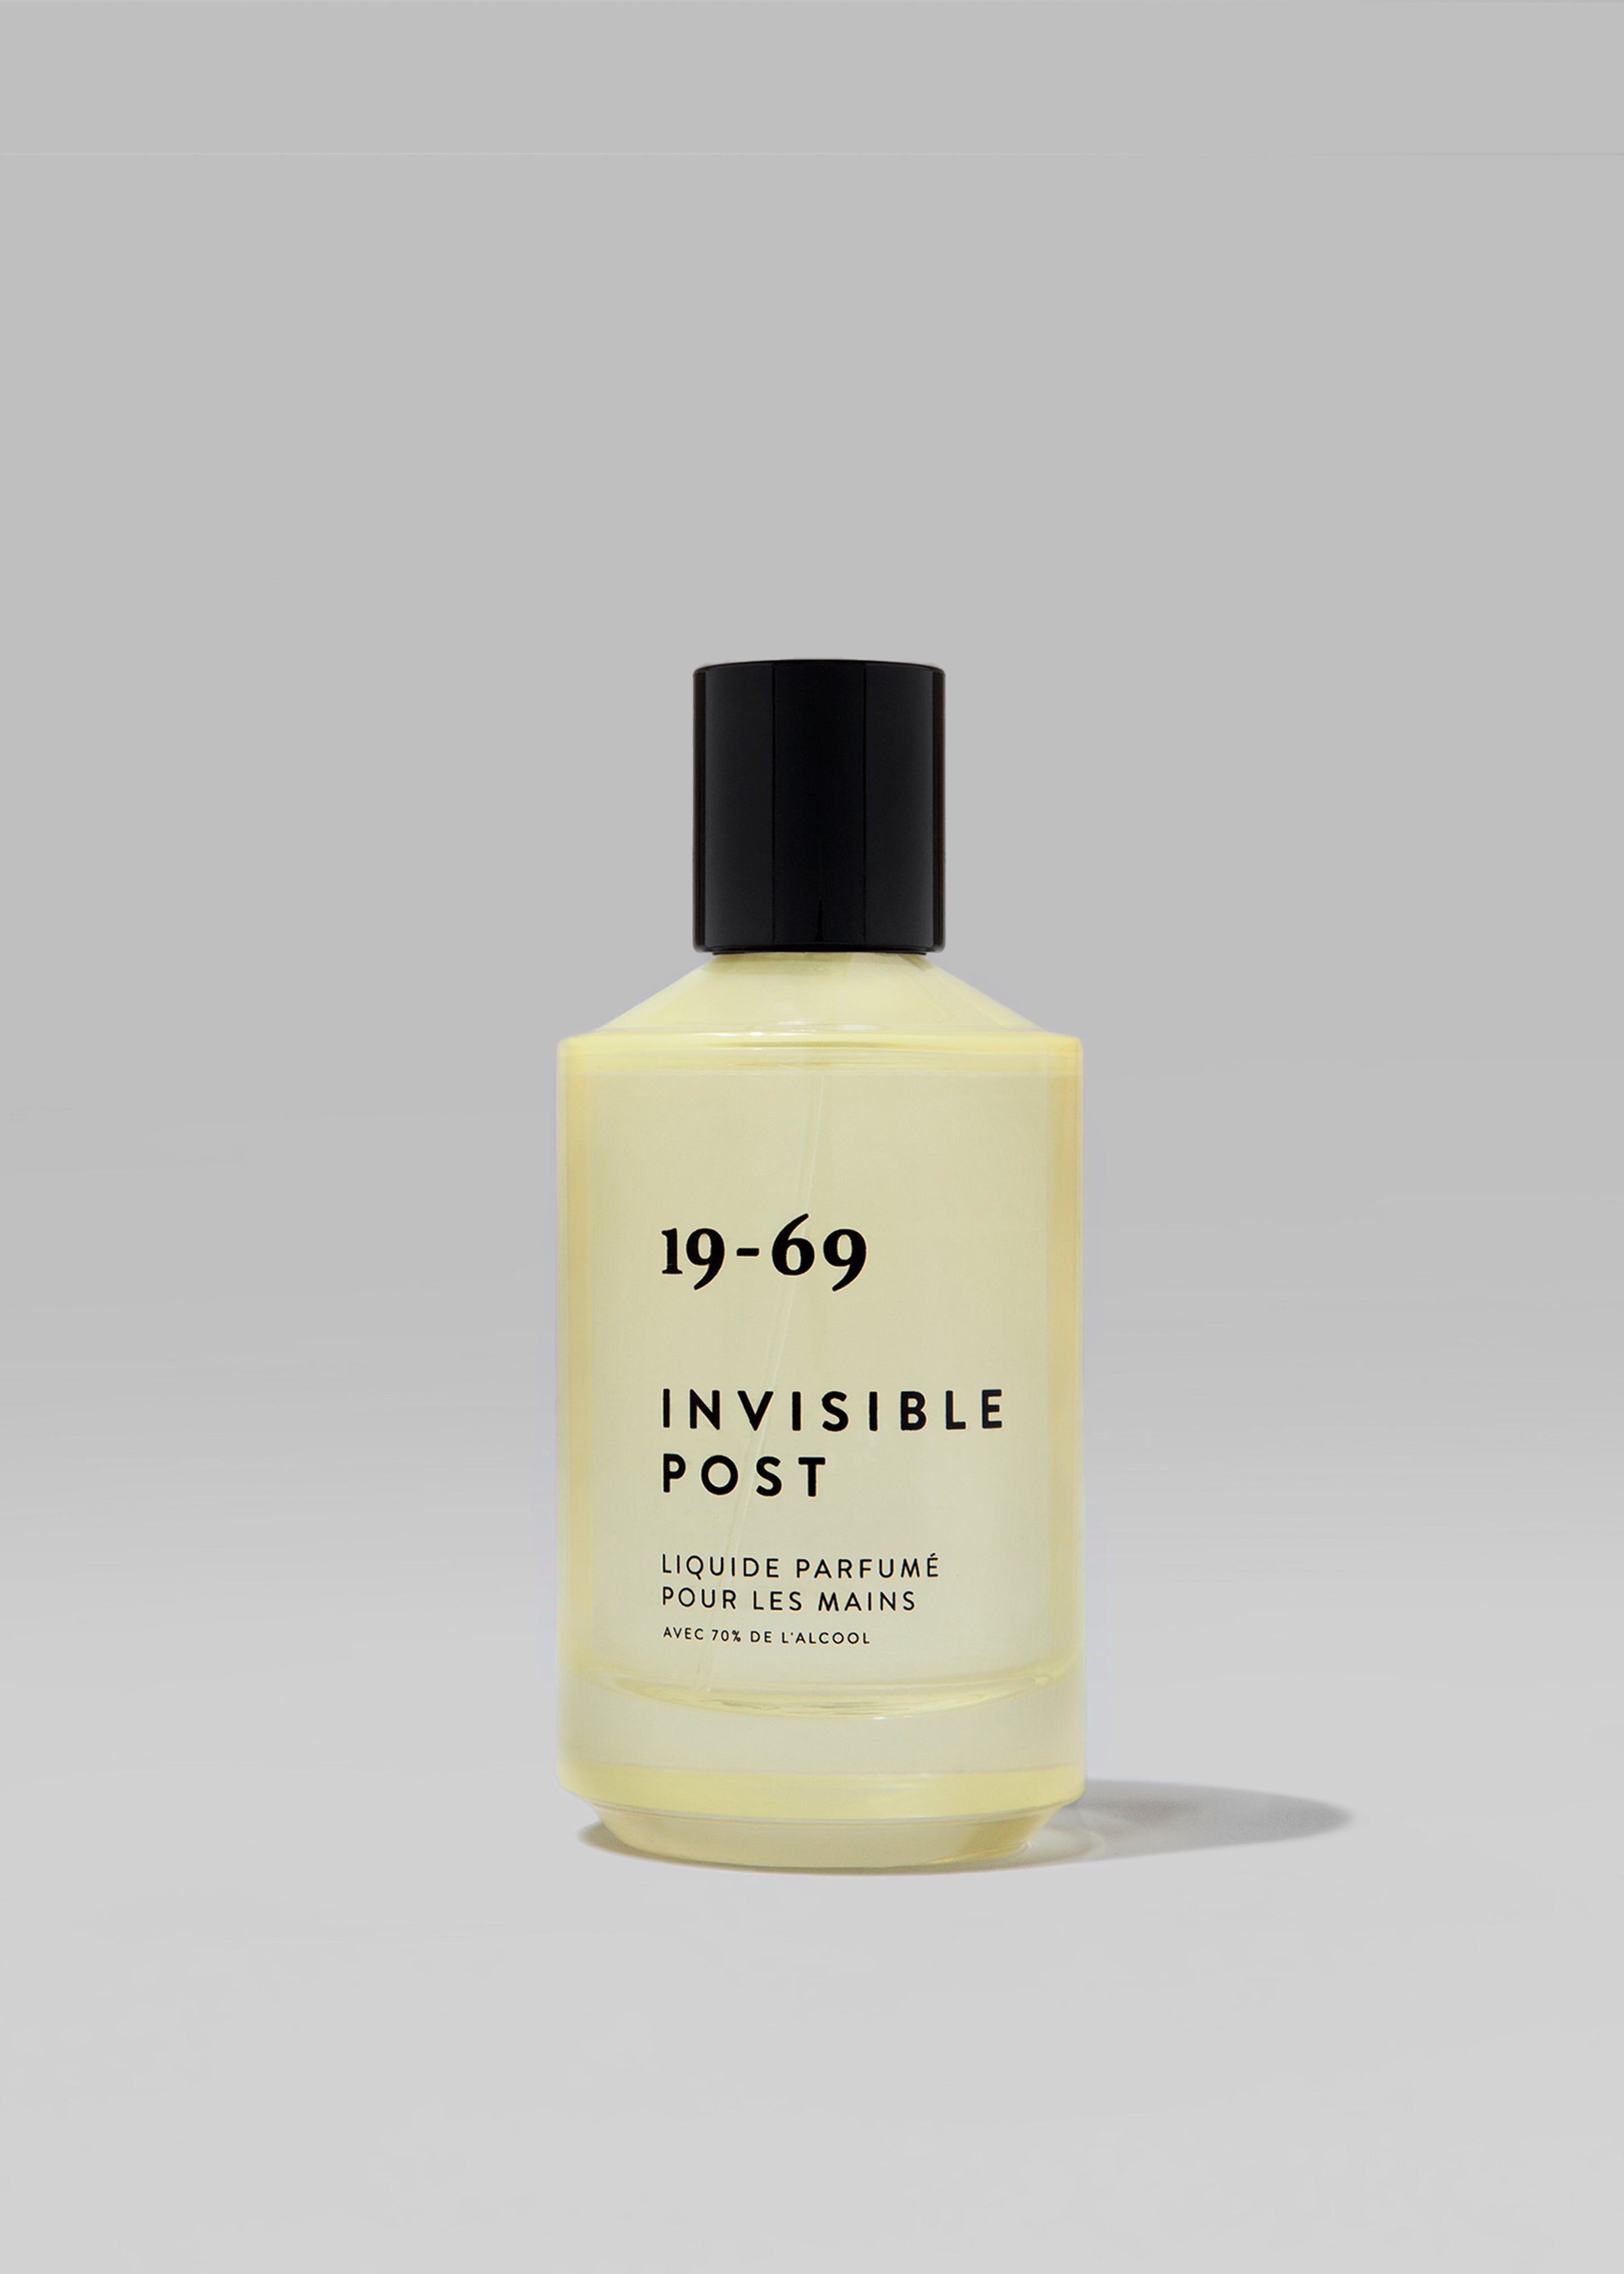 19-69 Invisible Post Hand Sanitizing Spray - 1